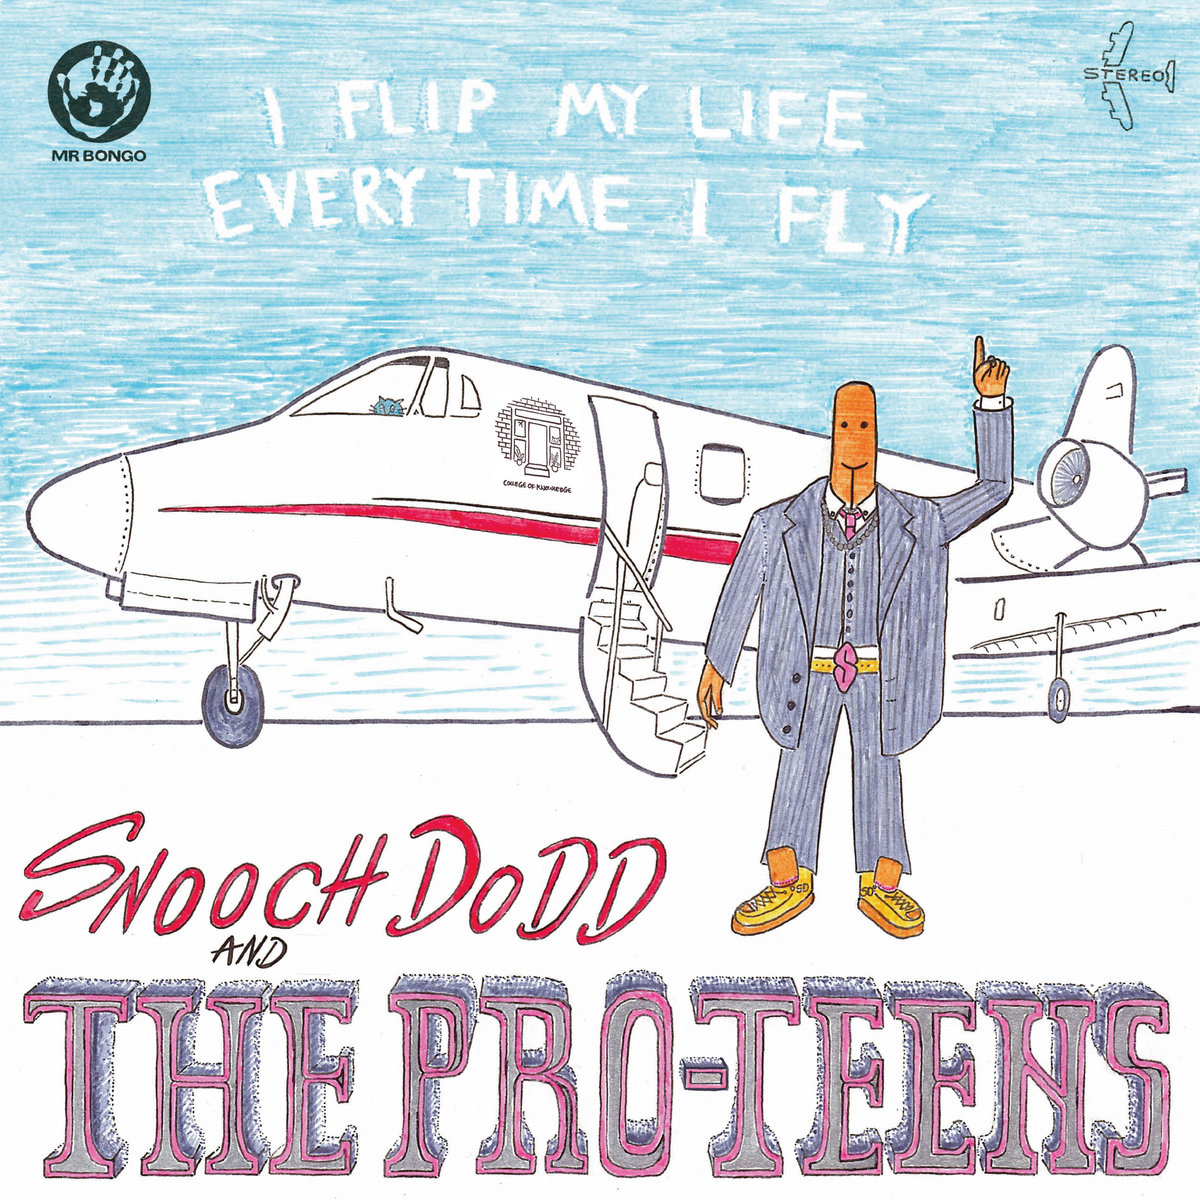 Snooch Dodd and The Pro-Teens - I Flip My Life Every Time I Fly : LP